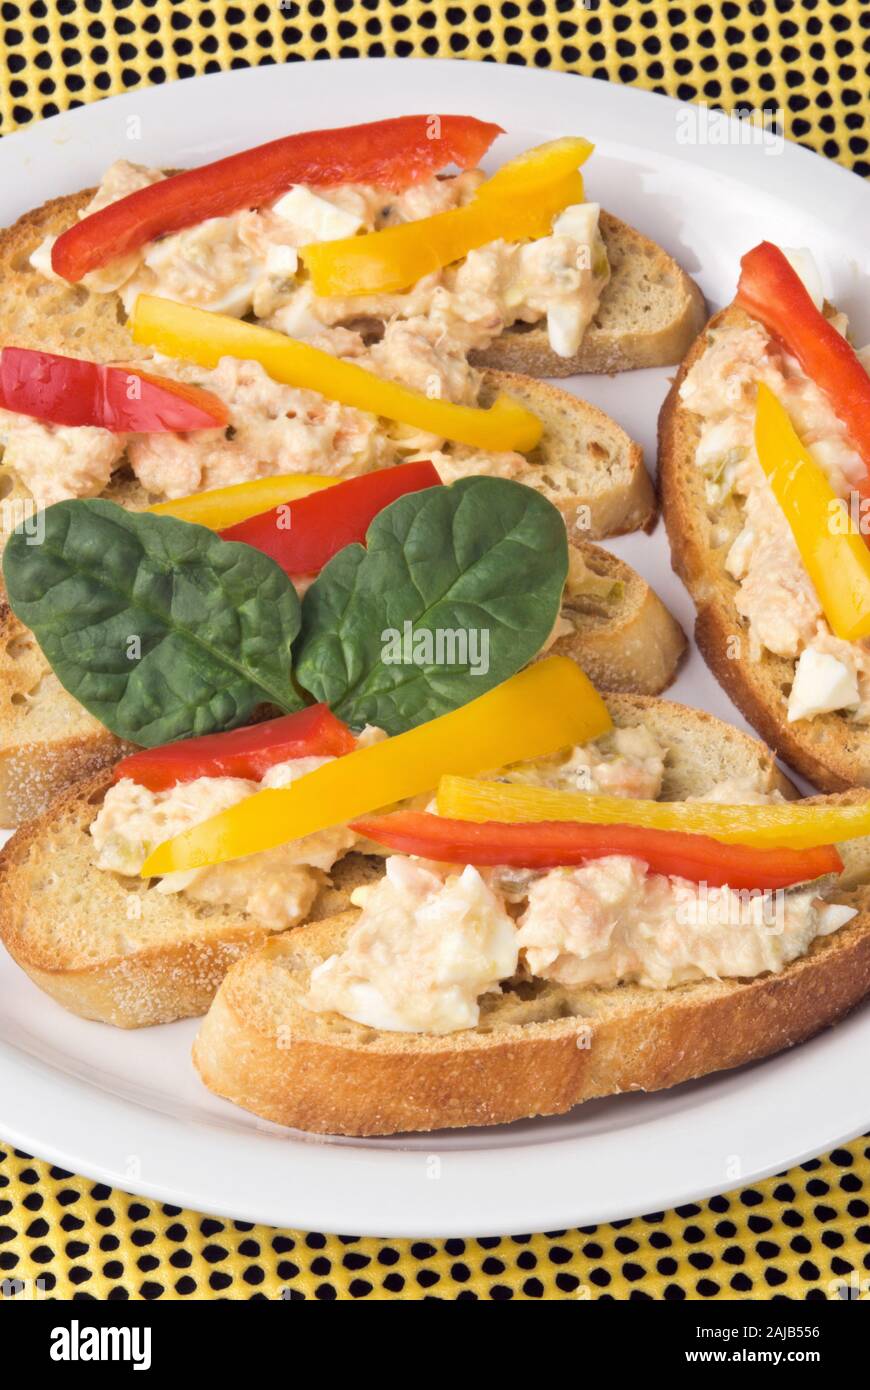 open faced toasted baguette sandwiches made with albacore tuna and wild pink salmon. Bell peppers and spinach leaves are garnishments. Stock Photo